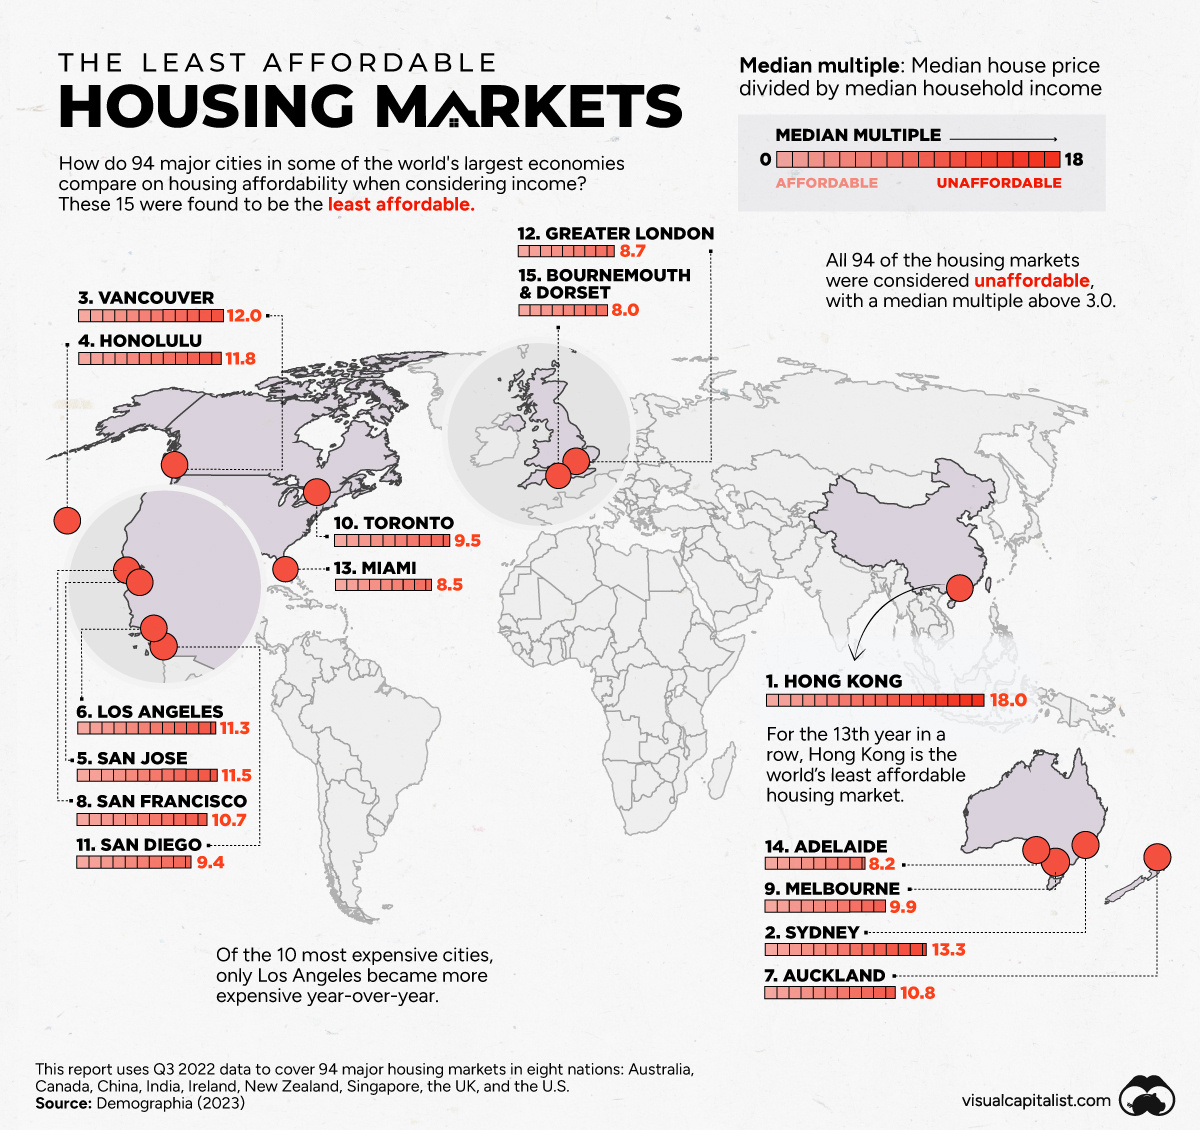 Mapping housing market affordability and some of the least affordable cities.